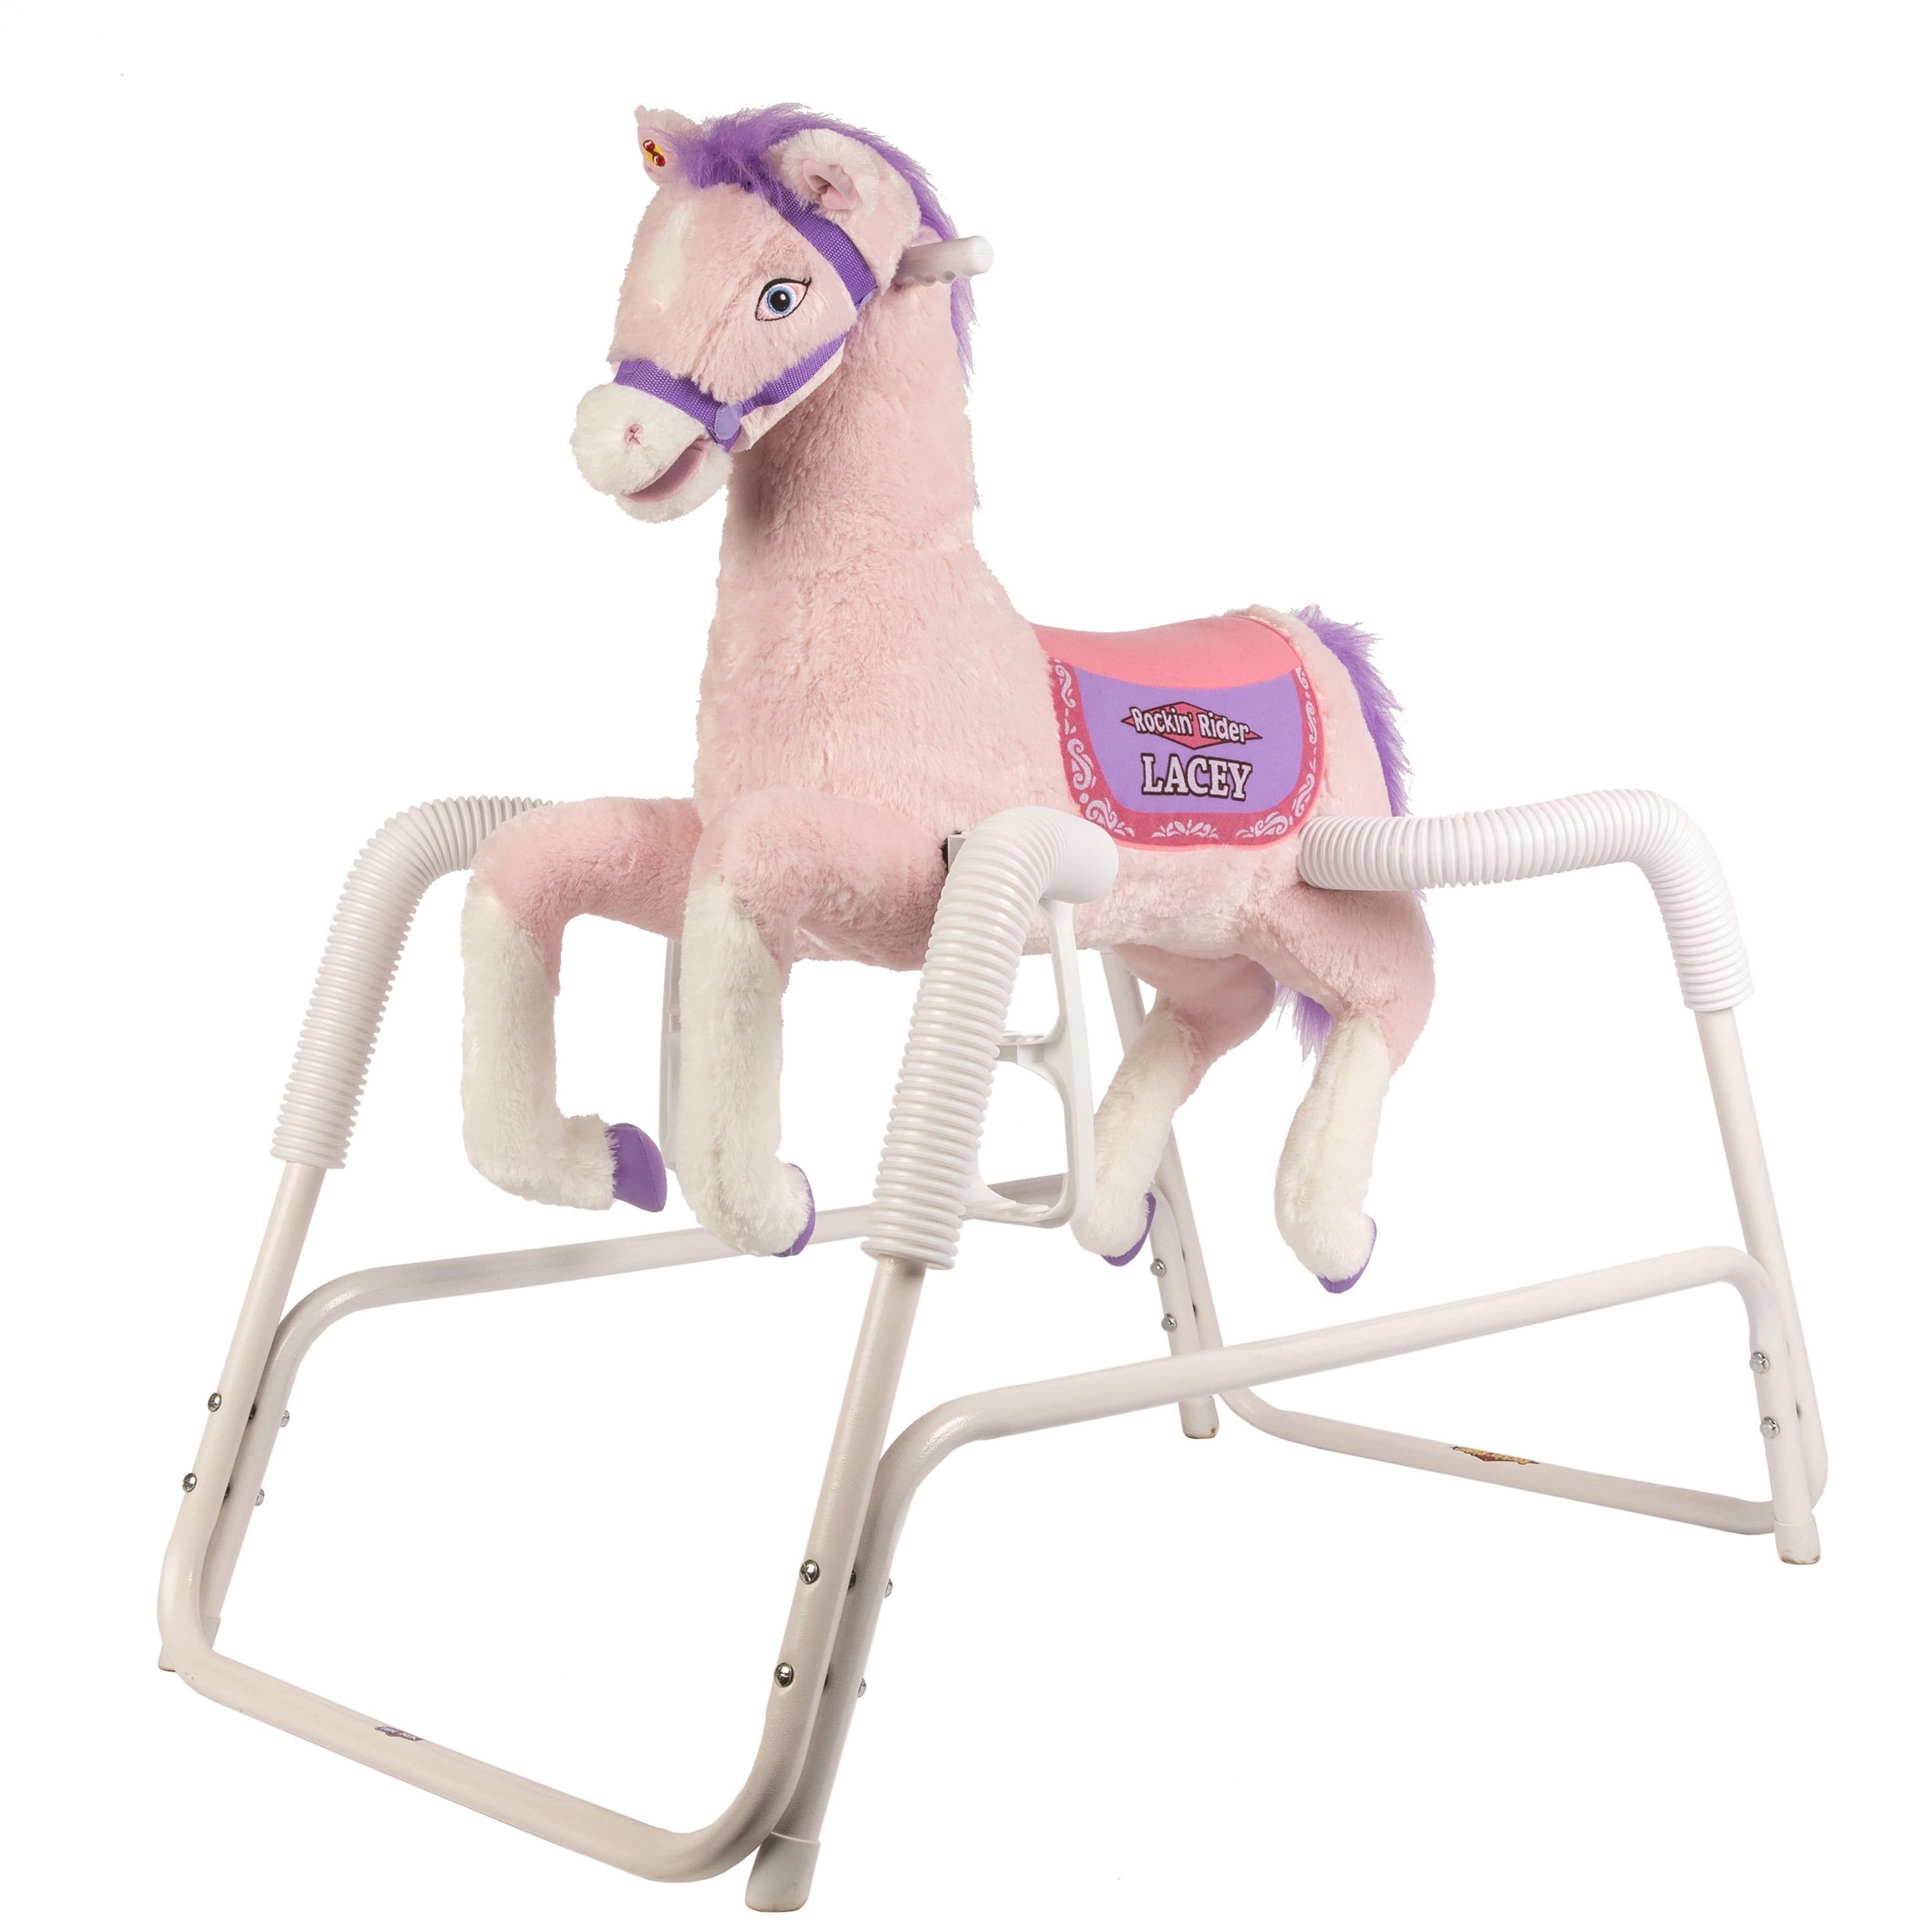 Rockin' Rider Legacy Grow with Me Pony Ride-On Bouncer Convertible to S Rocker 